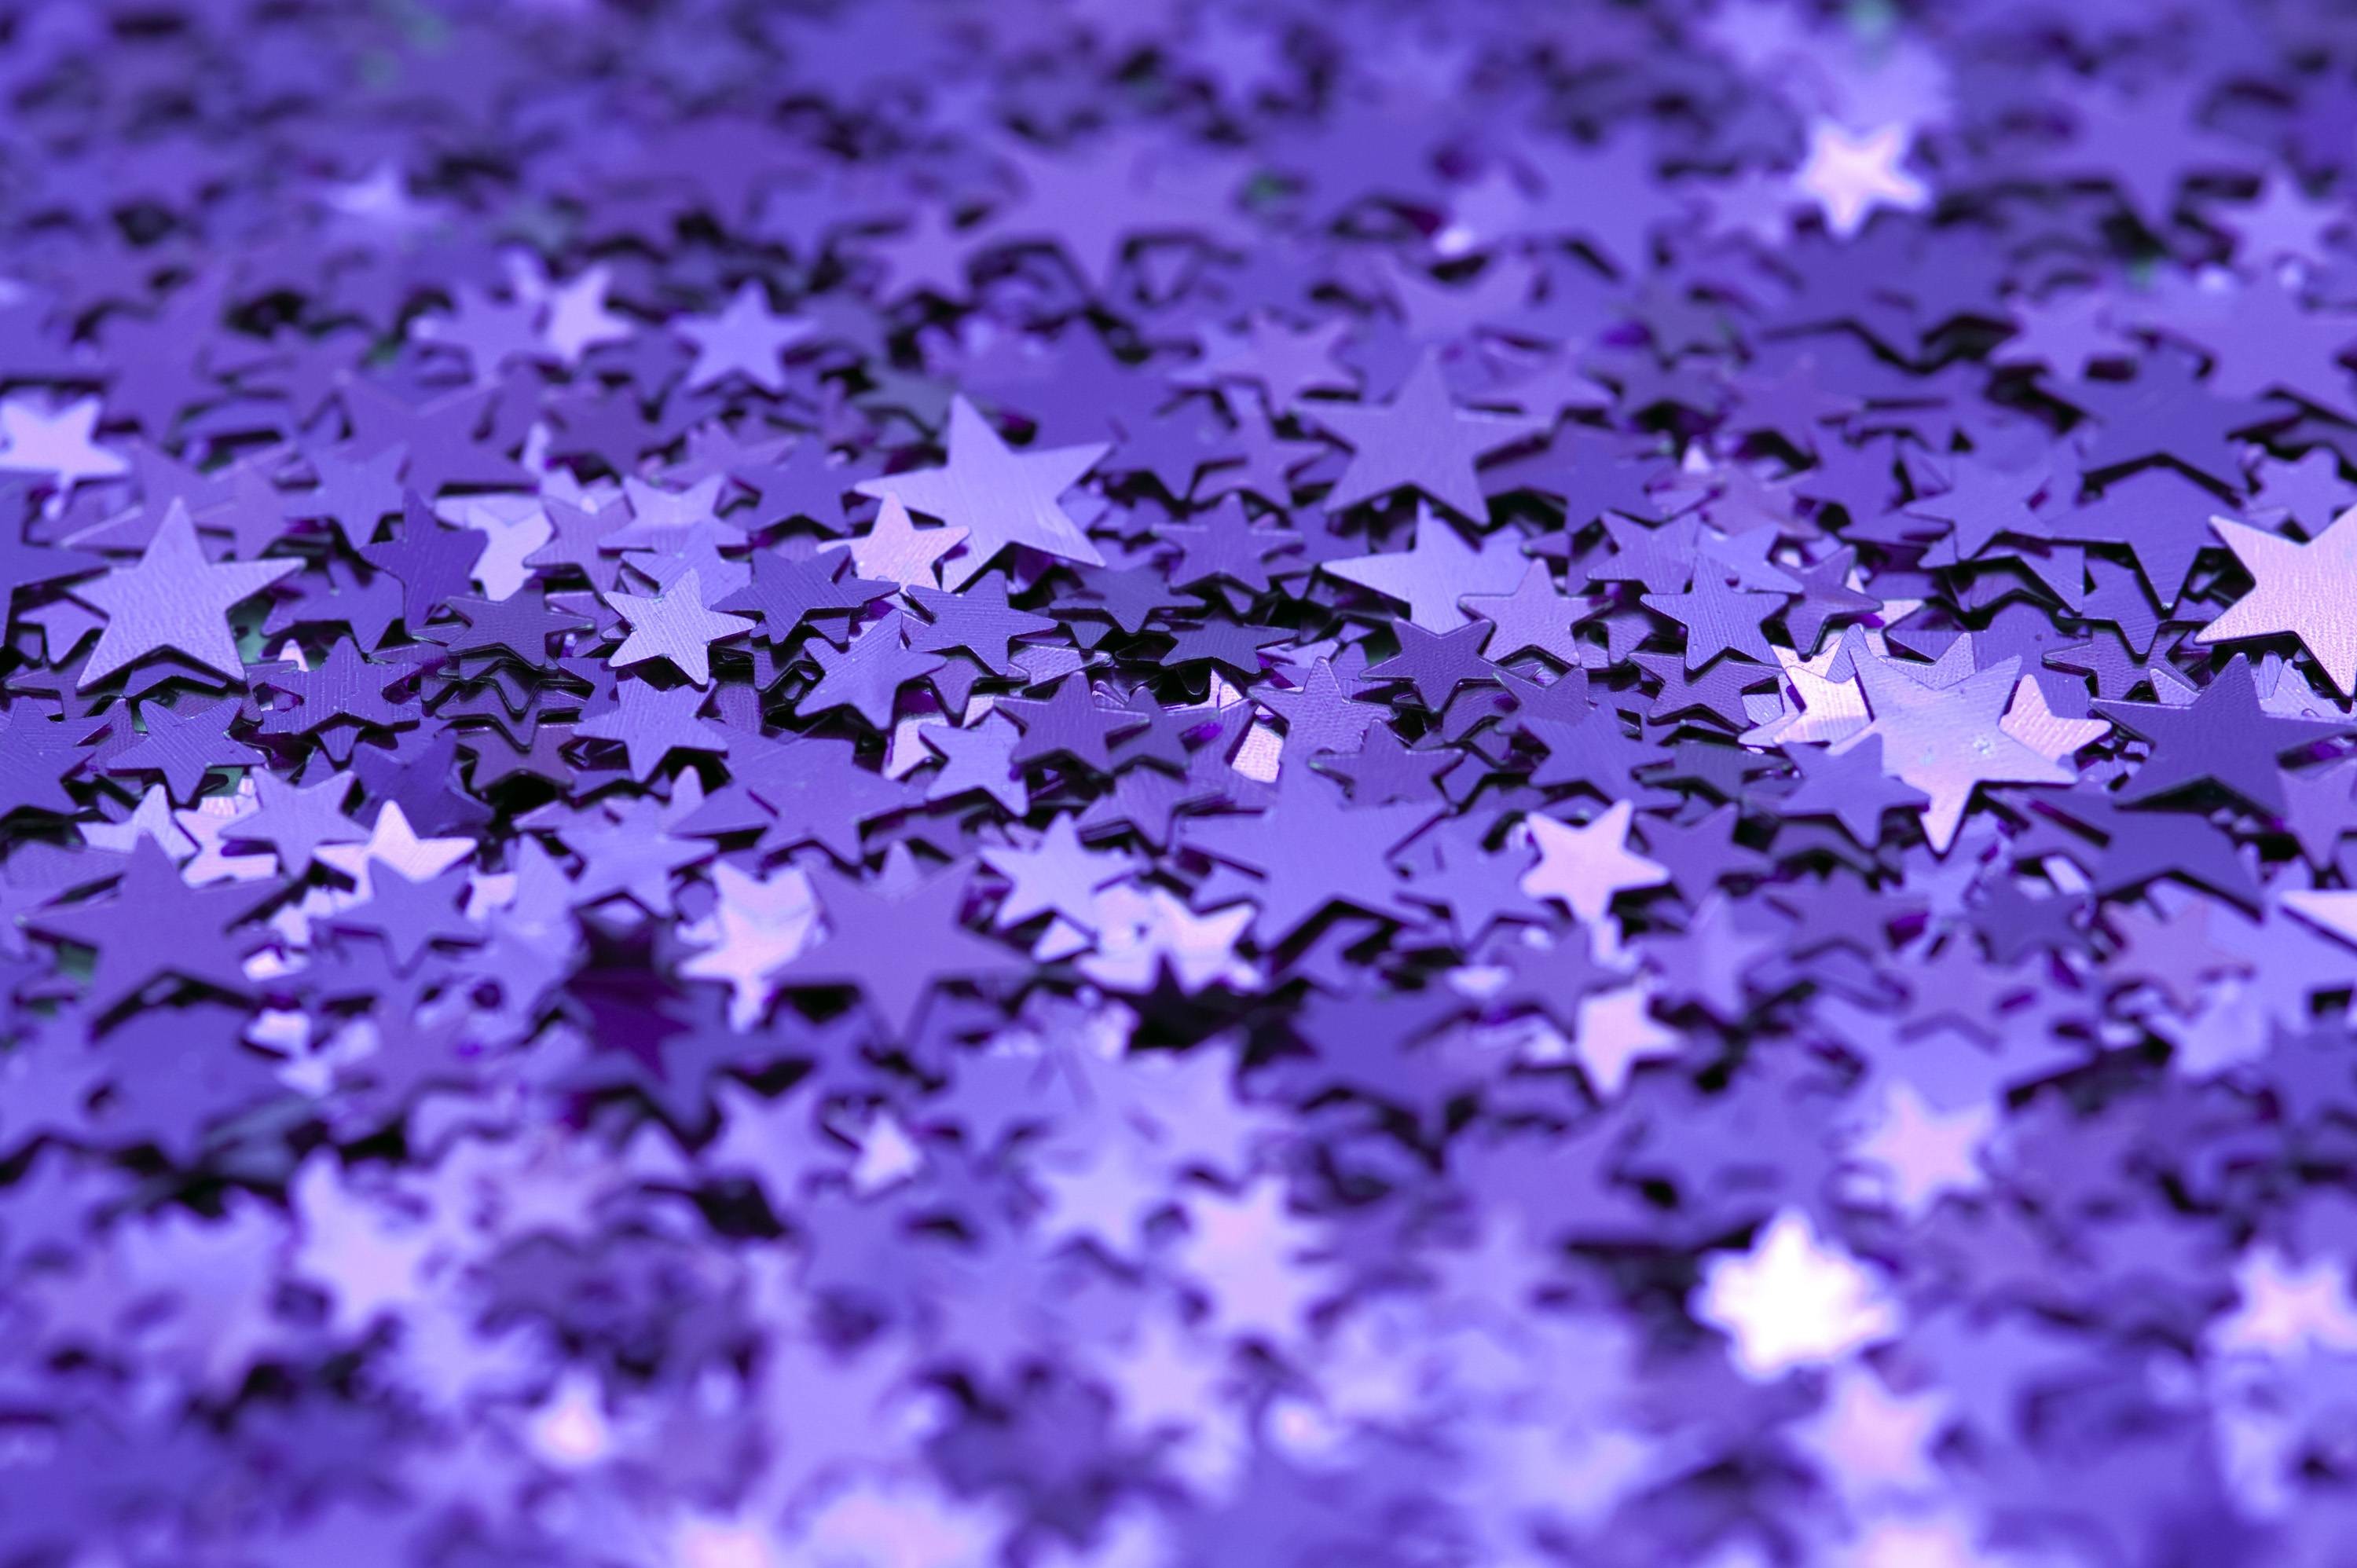 3000x1996 Glitter Background 12 344421 High Definition Wallpapers| wallalay.